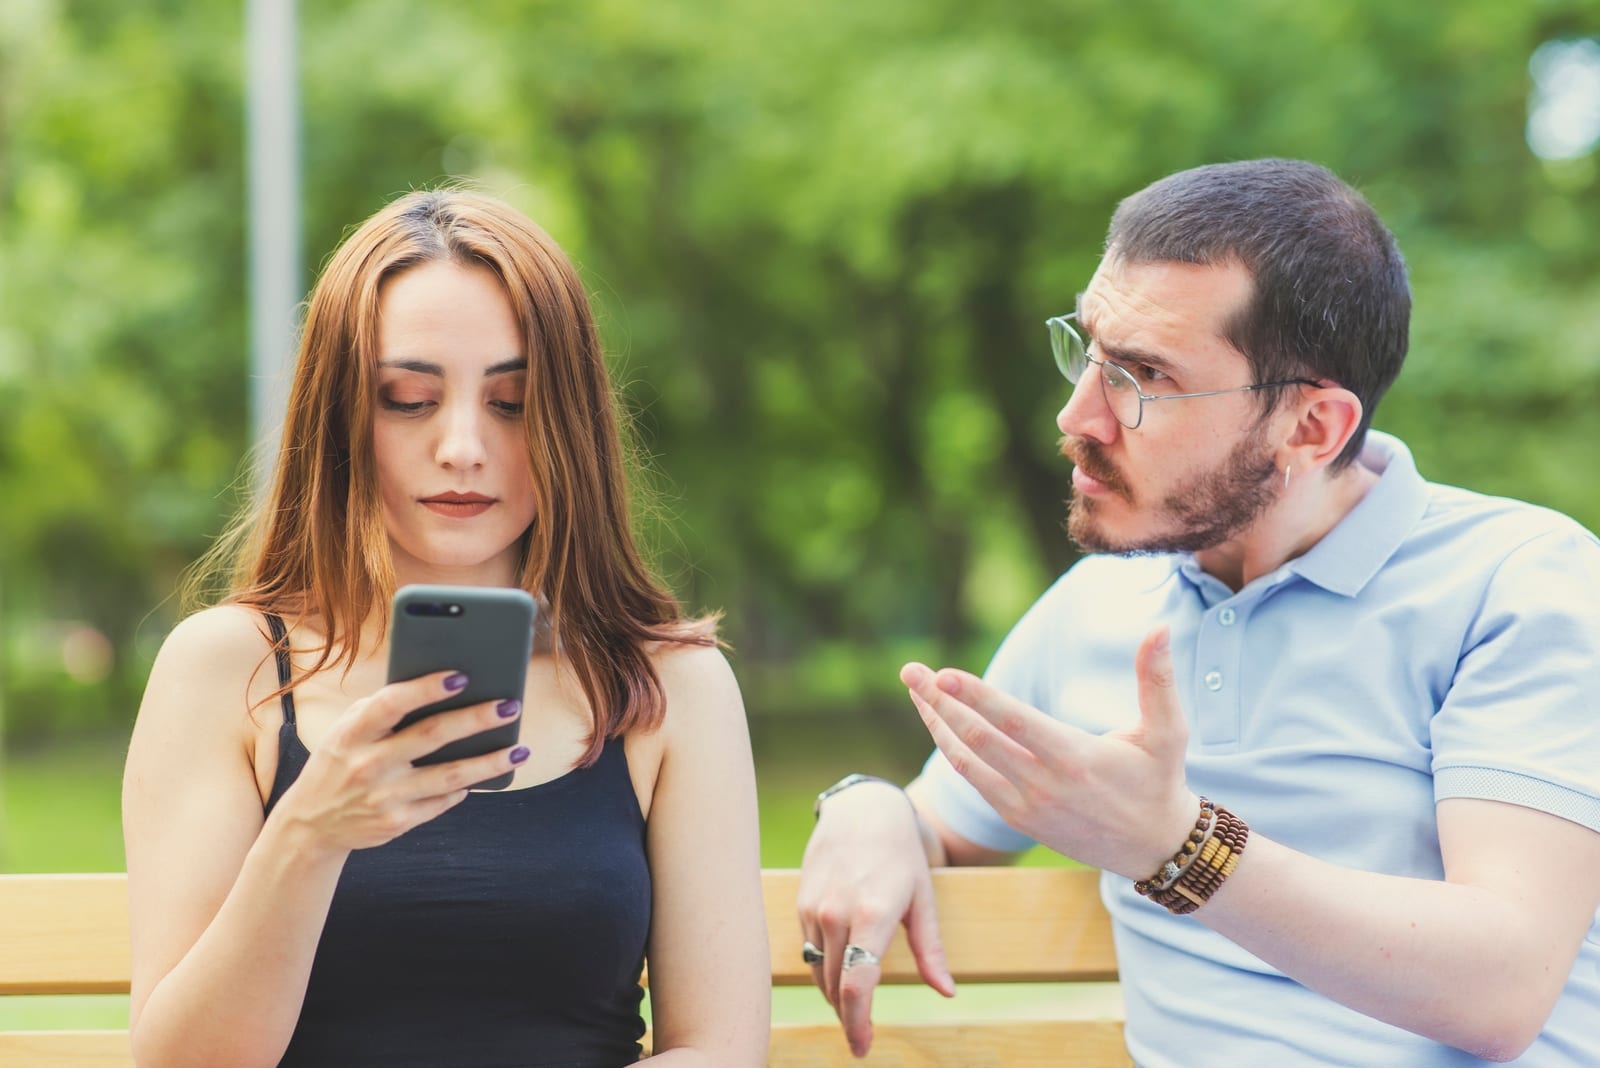 woman using smartphone while sitting near angry man